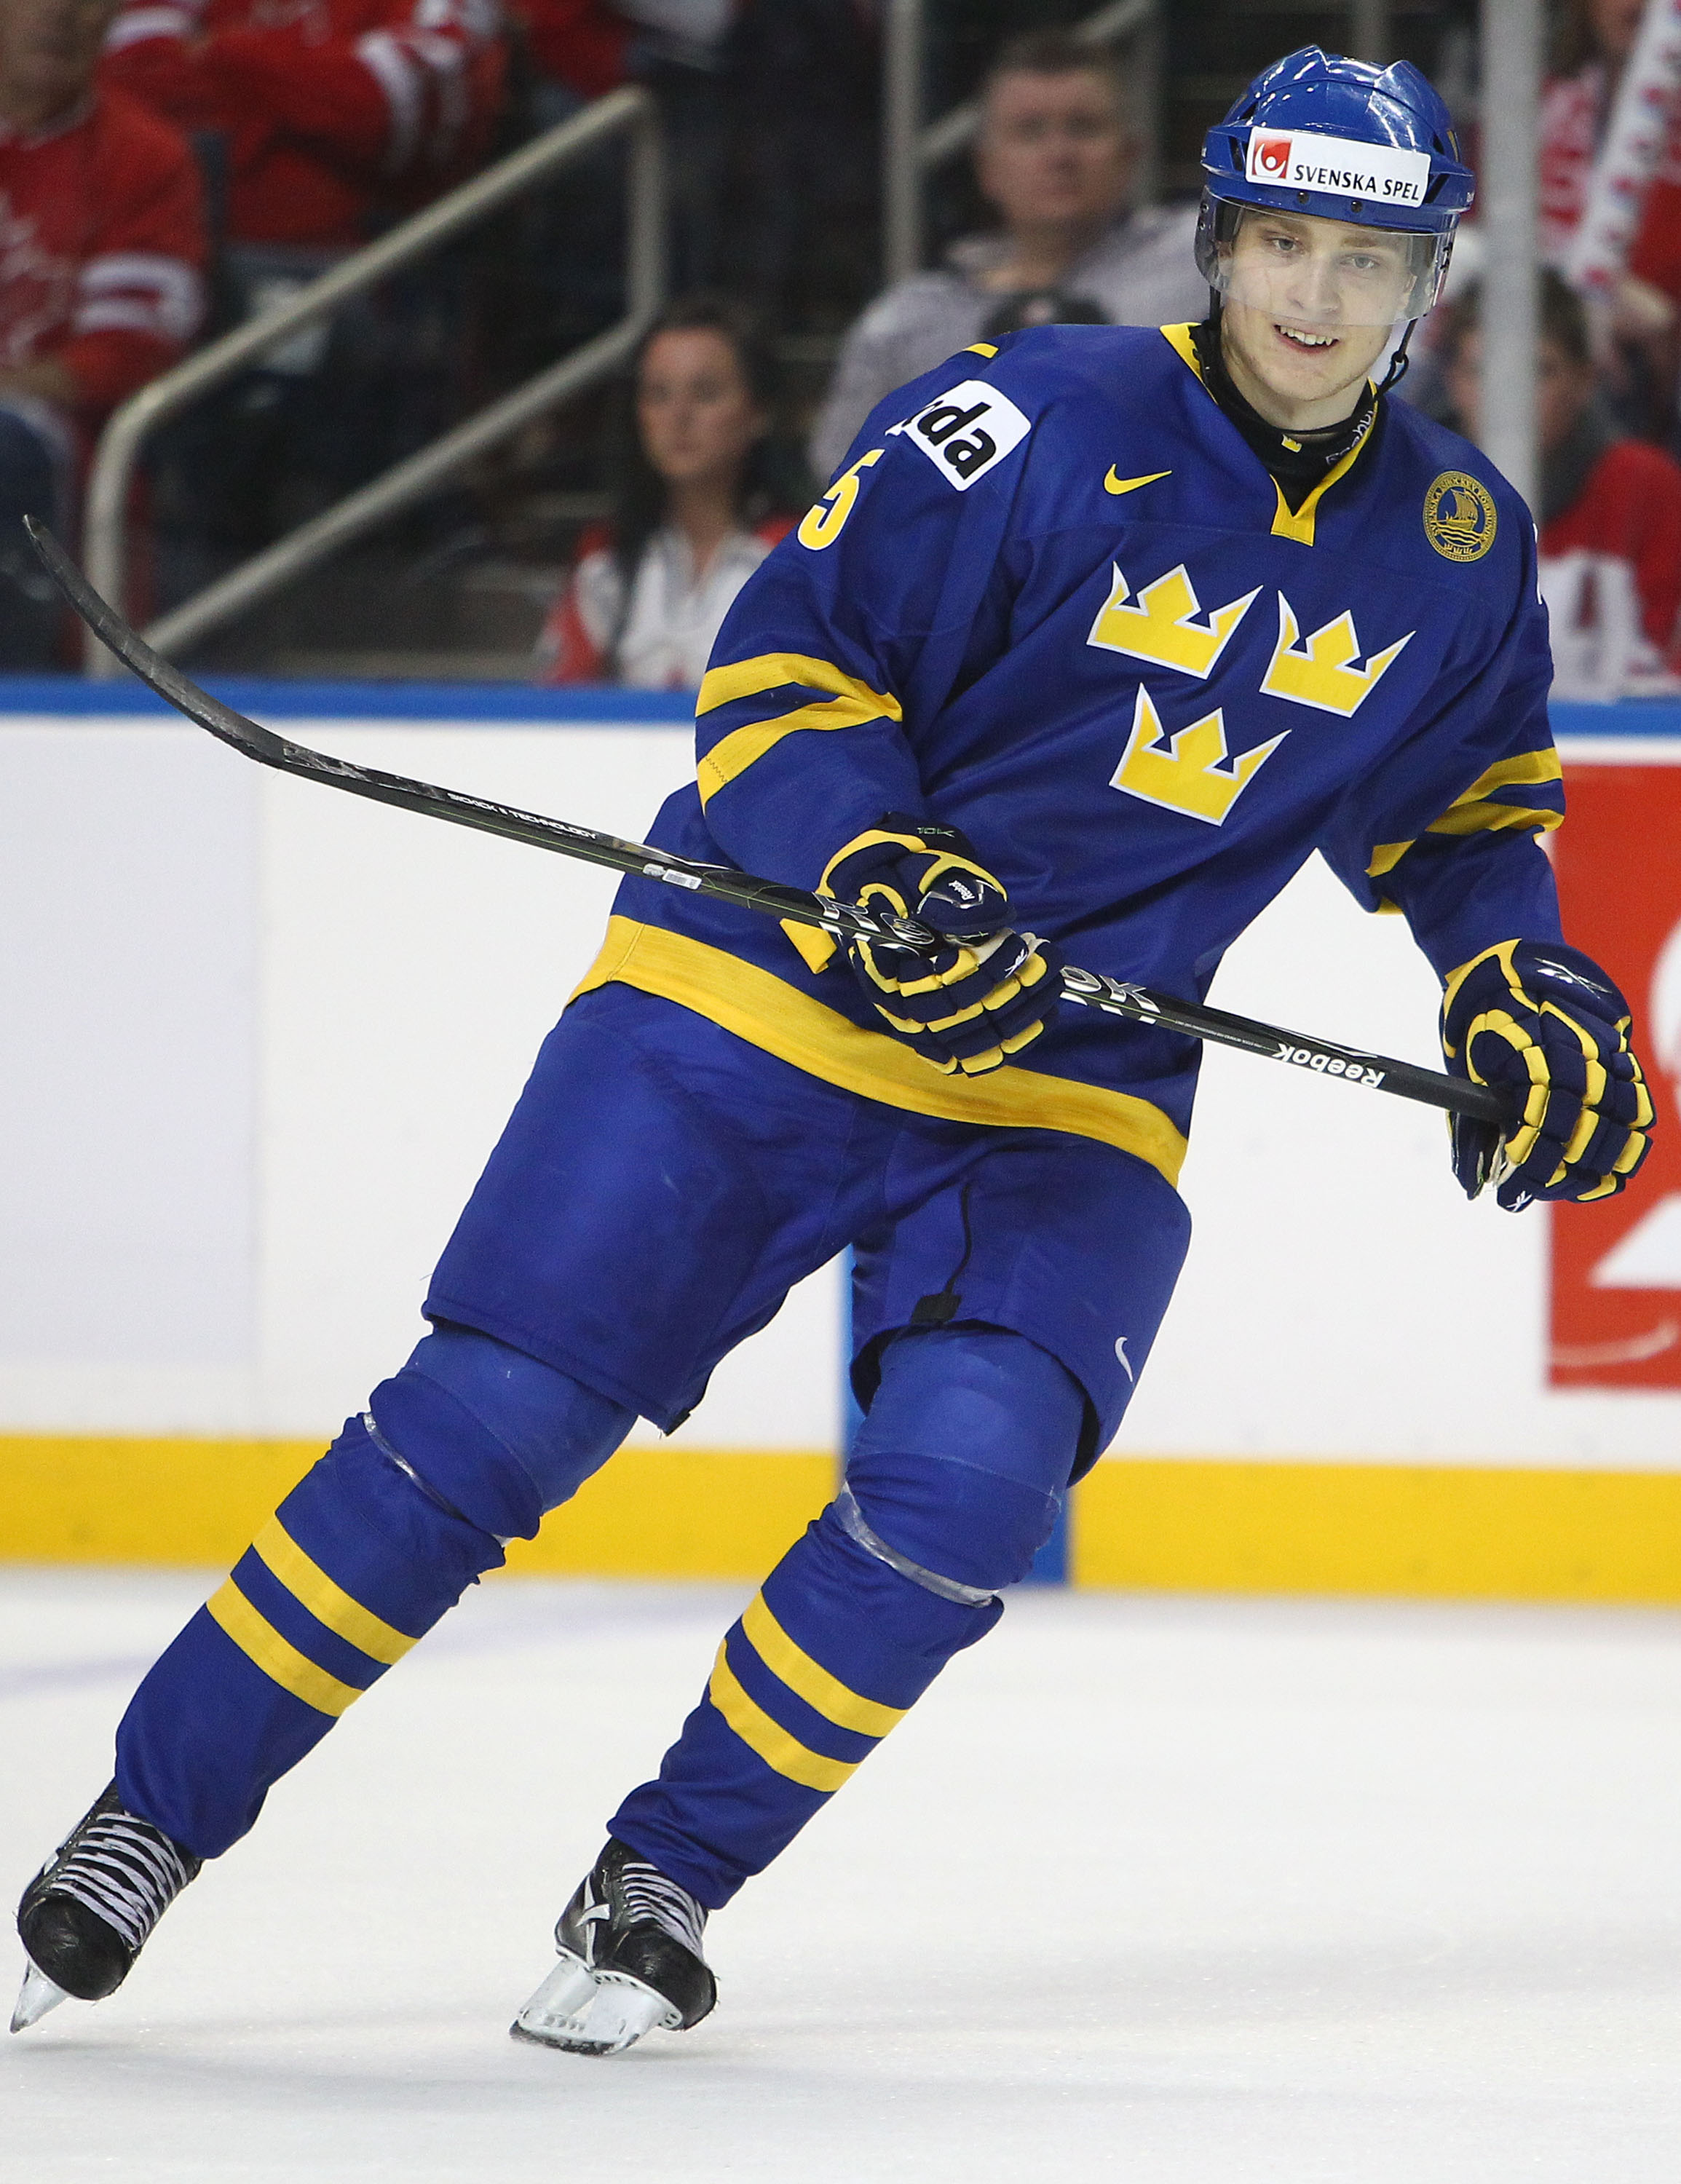 BUFFALO, NY - DECEMBER 31: Defenseman Adam Larsson #5 of Sweden during the 2011 IIHF World U20 Championship game between Canada and Sweden on December 31, 2010 at HSBC Arena in Buffalo, New York. (Photo by Tom Szczerbowski/Getty Images)